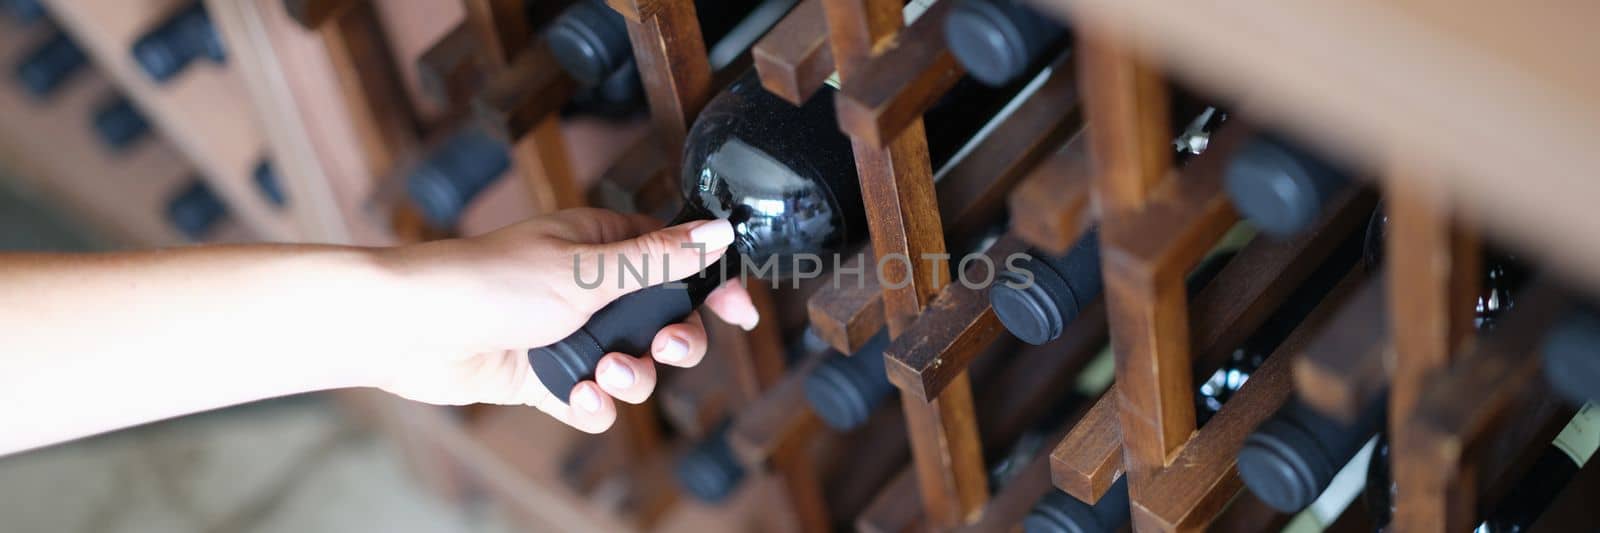 Woman chooses bottle of wine in cellar closeup. Expensive collectible red wines concept